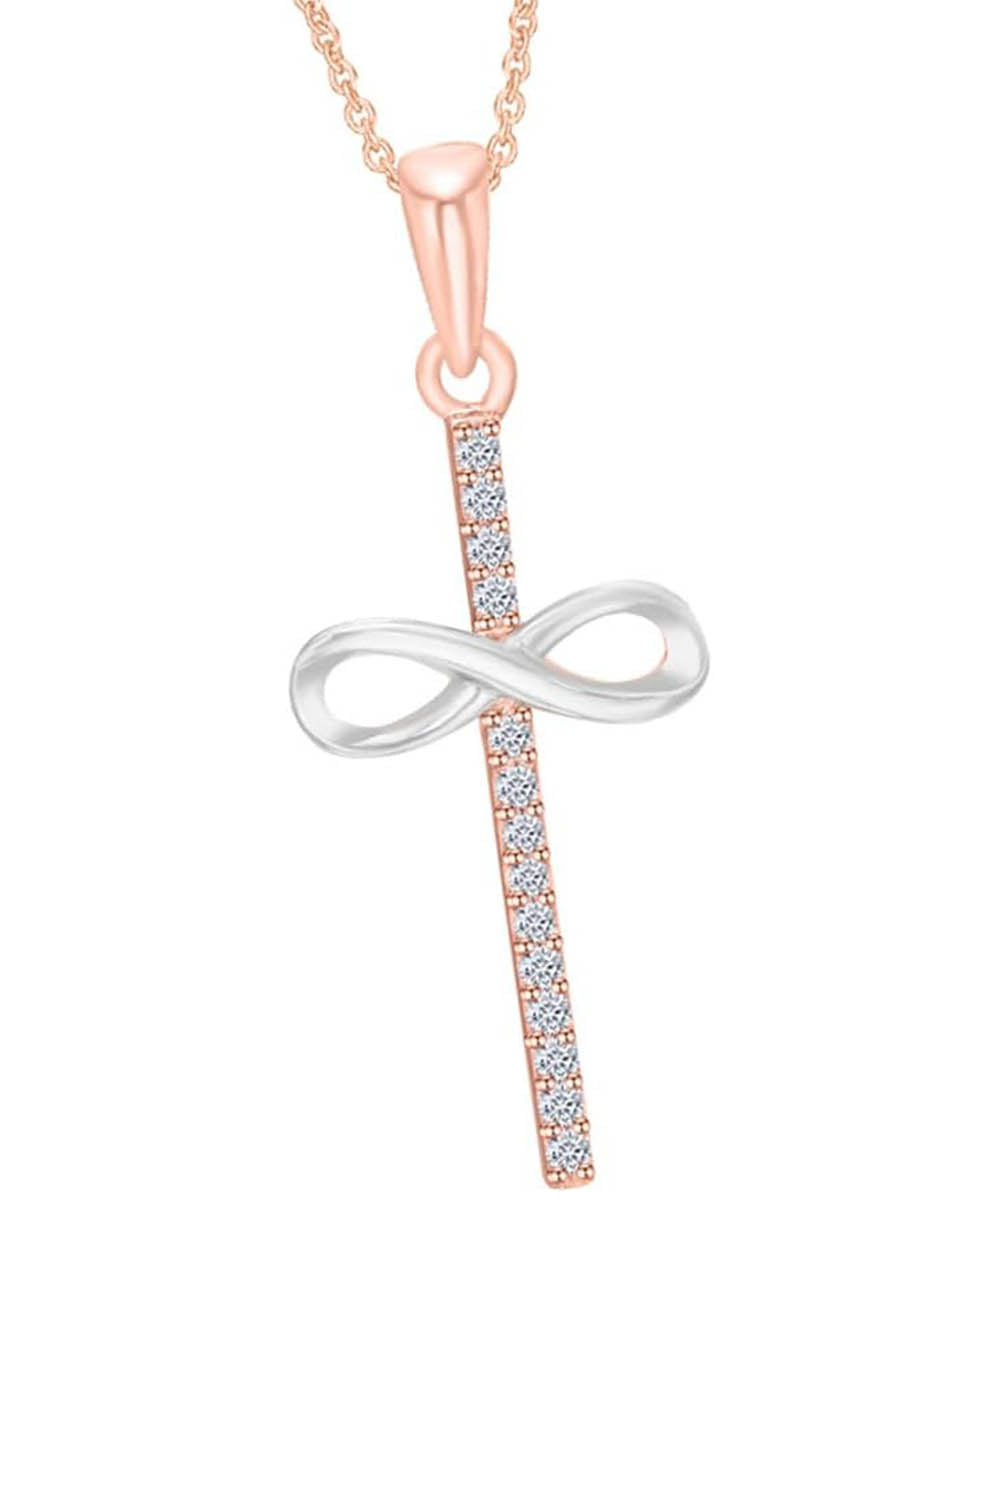 Rose Gold Color Infinity Cross Pendant Necklace, Infinity Necklace